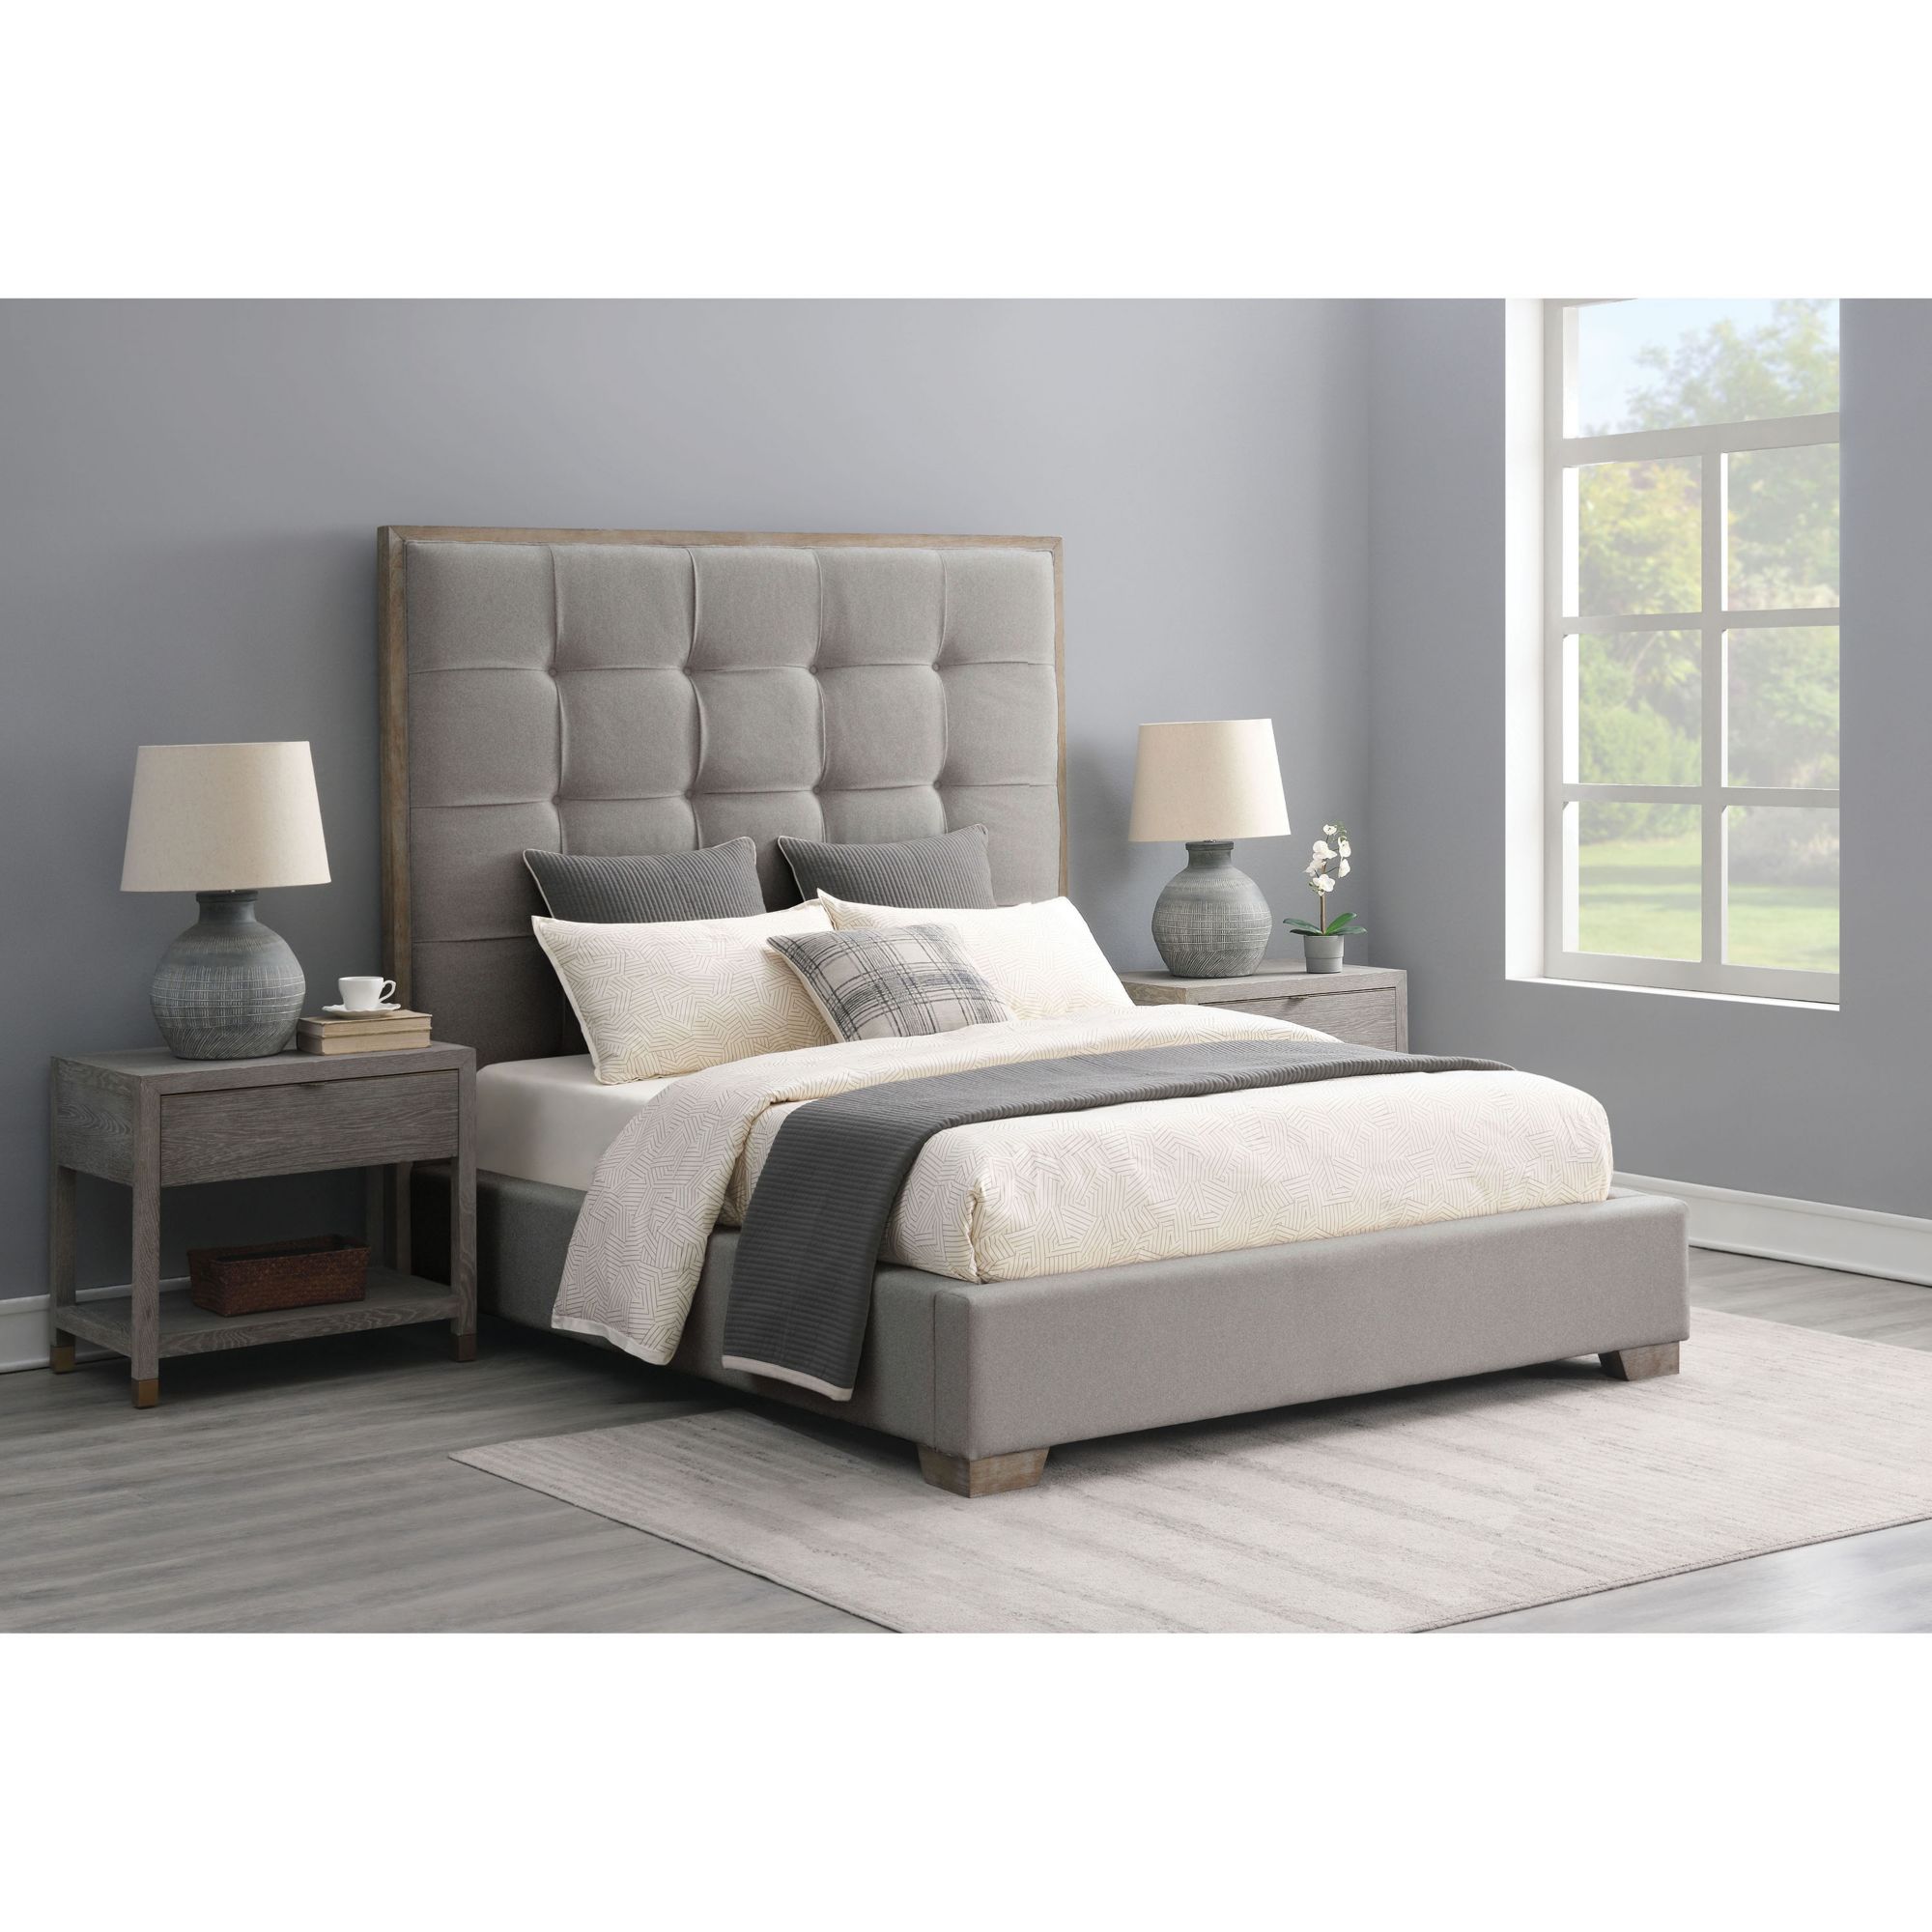 Abbyson Home Remi Stain Resistant King Bed - Gray